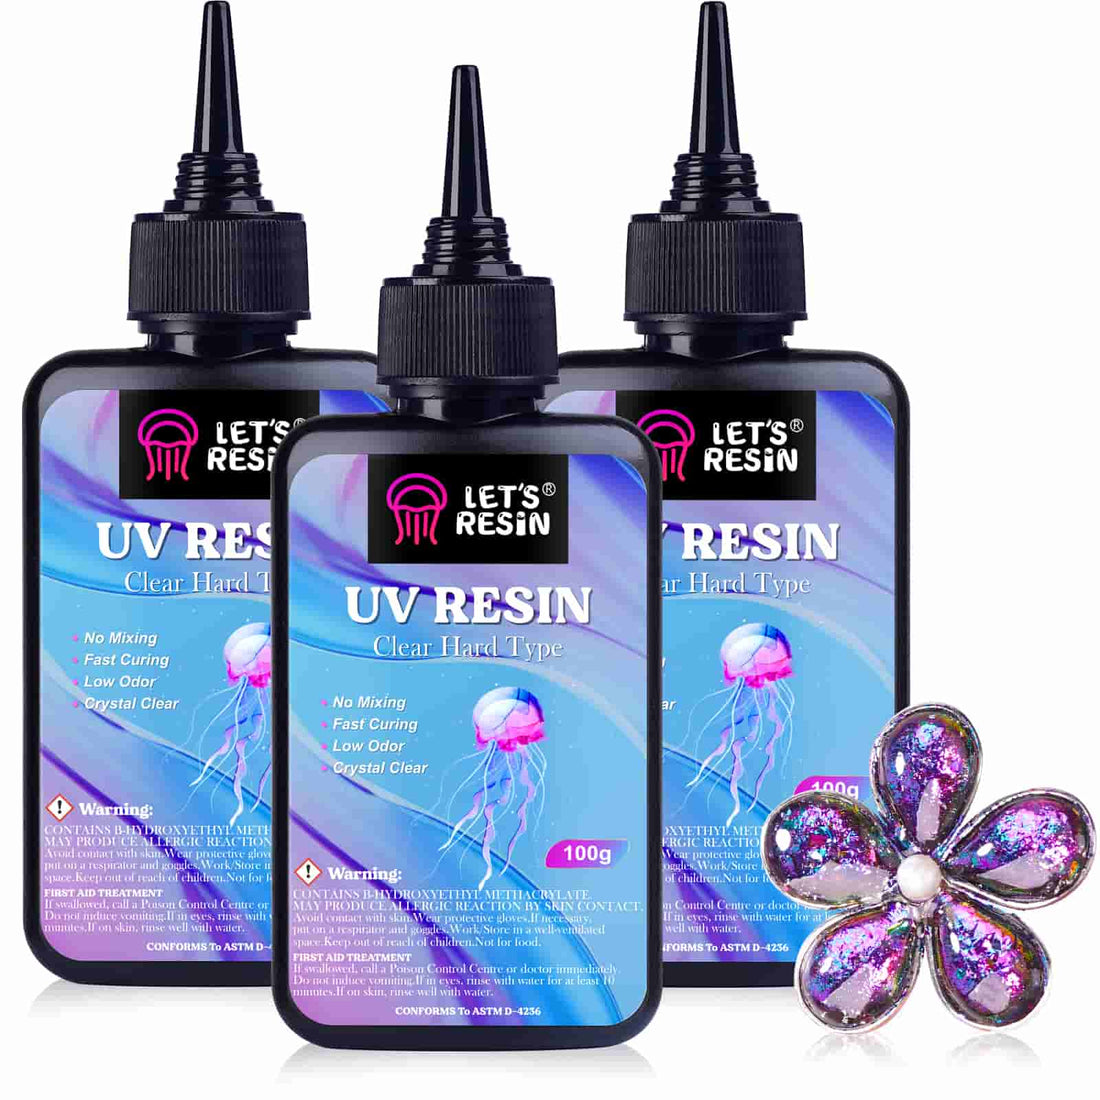 Let's Resin UV Resin With Light,upgraded 200g Crystal Clear&low Odor UV  Resin Kit,36w UV Light,silicone Mat,ultraviolet Epoxy Resin Hard 